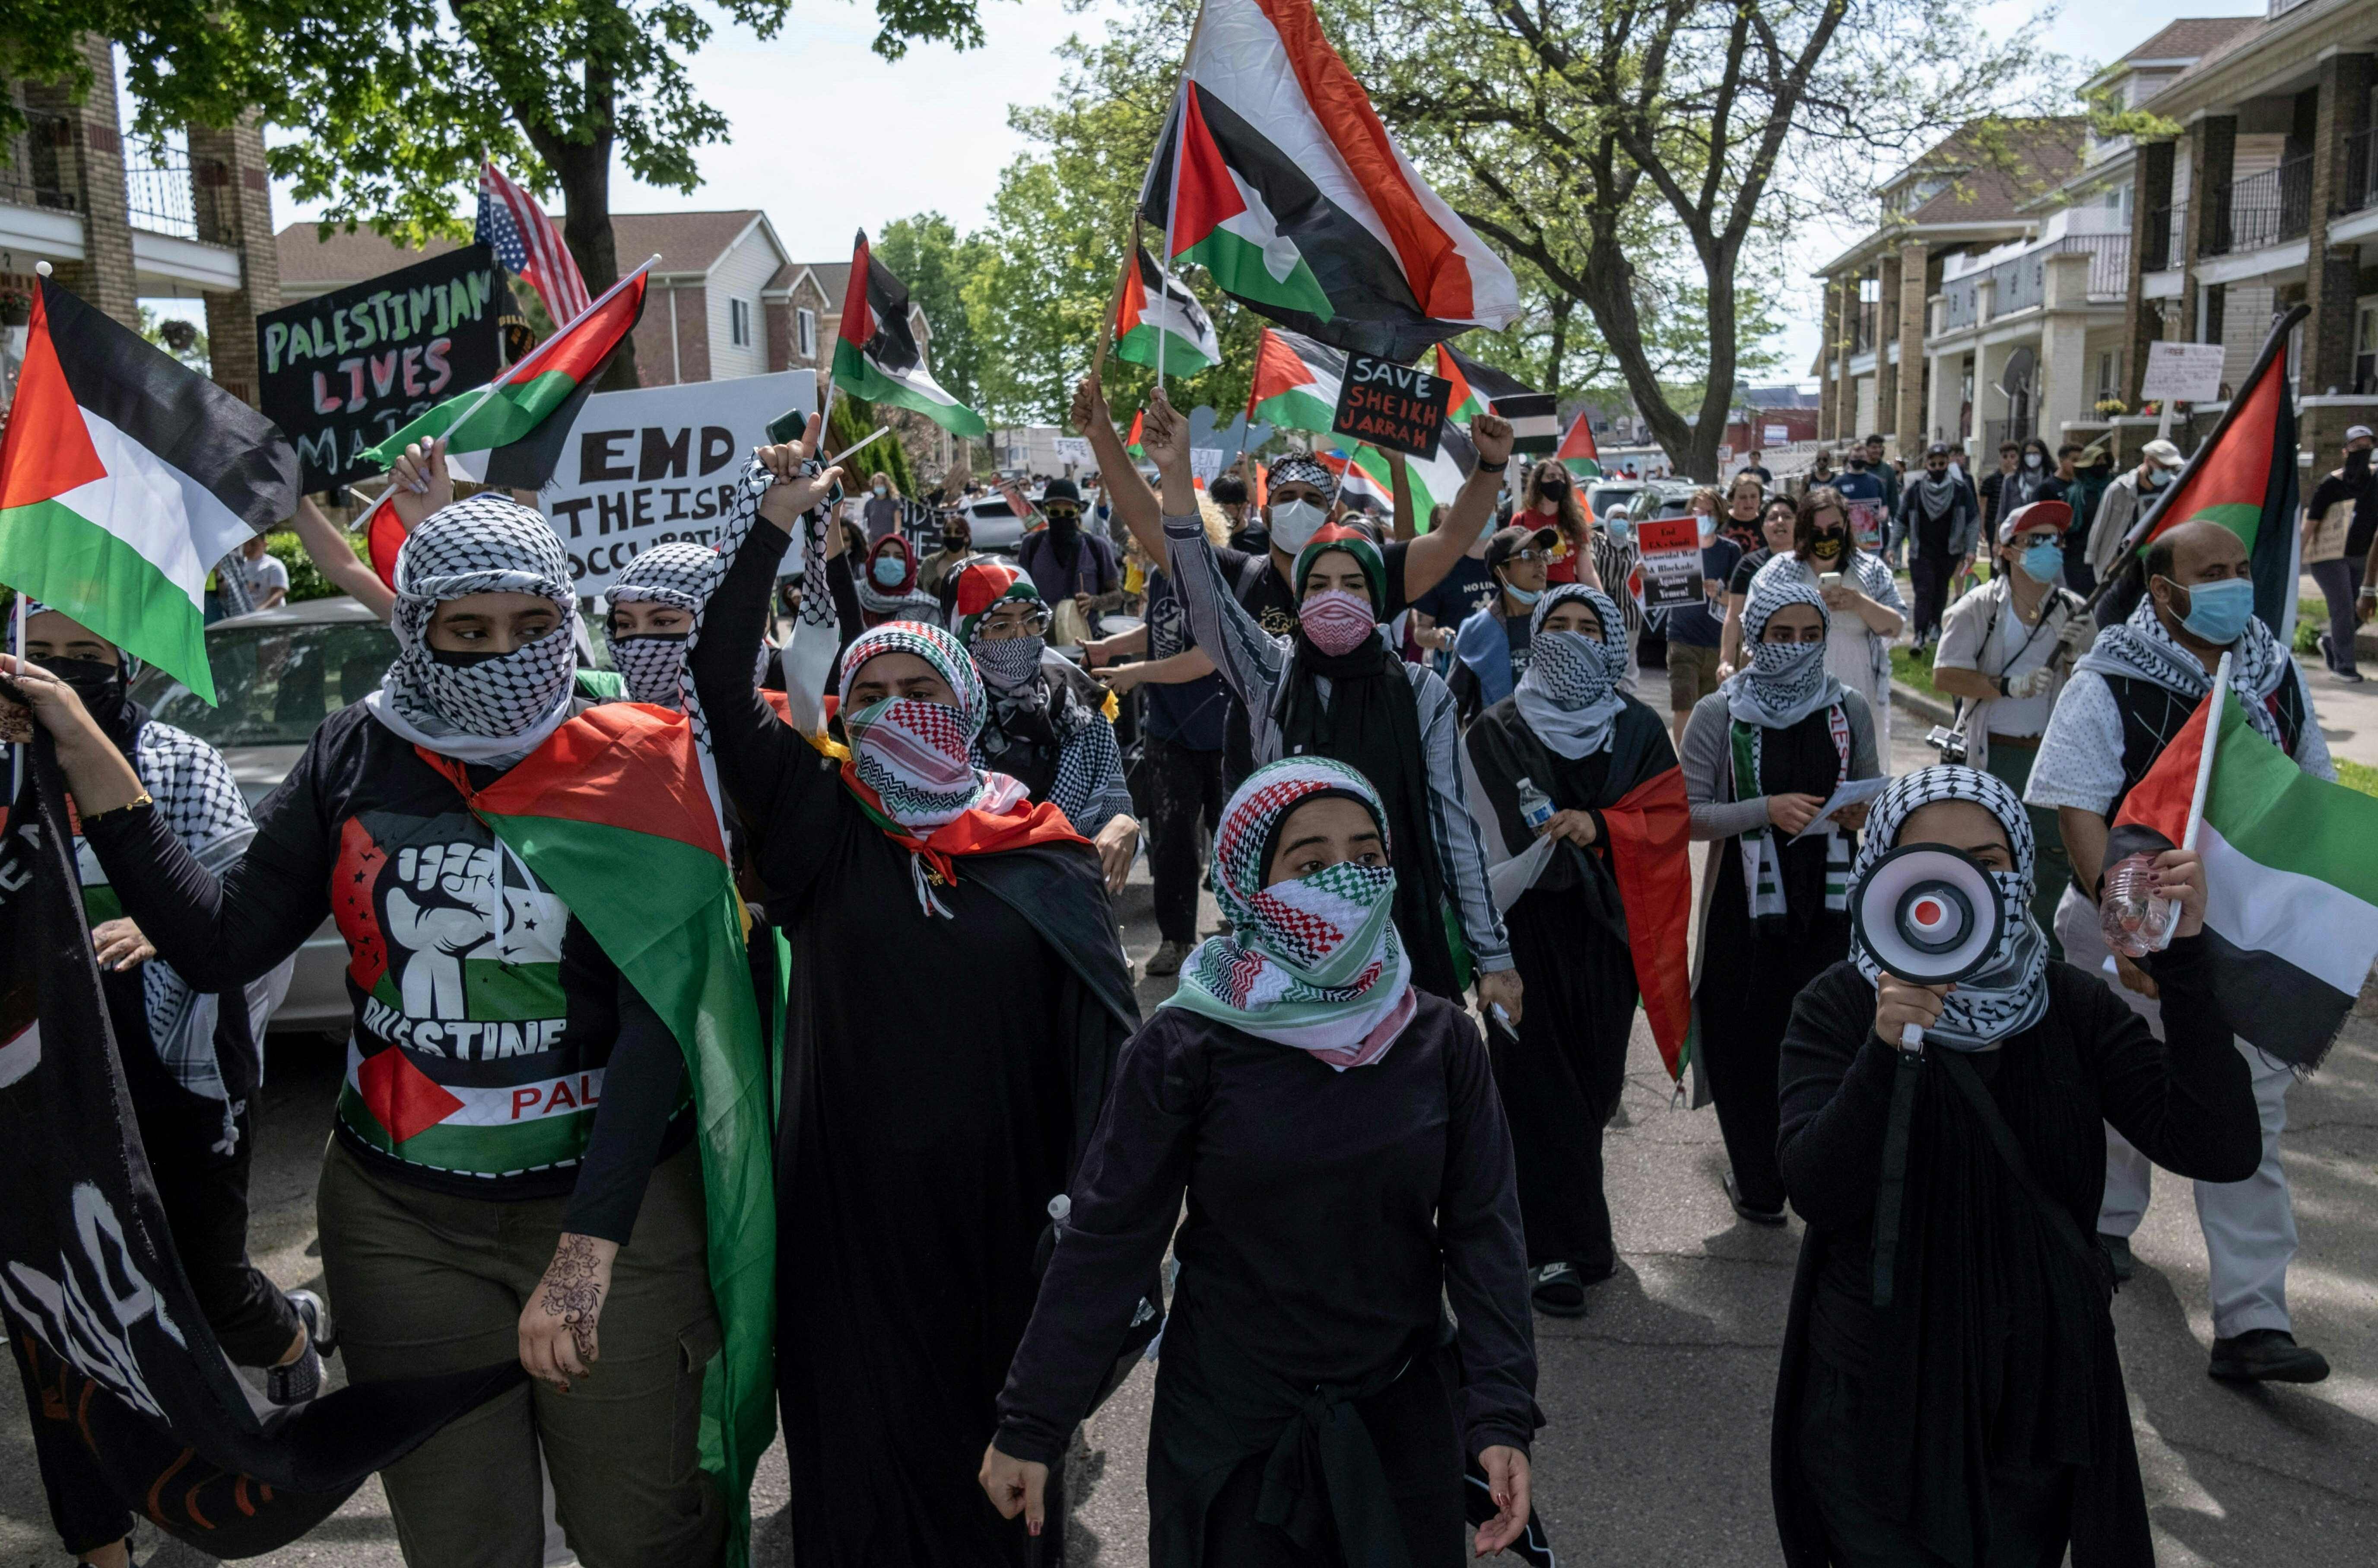 Protesters in Dearborn, Michigan protest the Biden administration’s support for Benjamin Netanyahu’s administration in Israel and the ongoing Israeli army actions in Gaza as the president tours a nearby Ford plant.